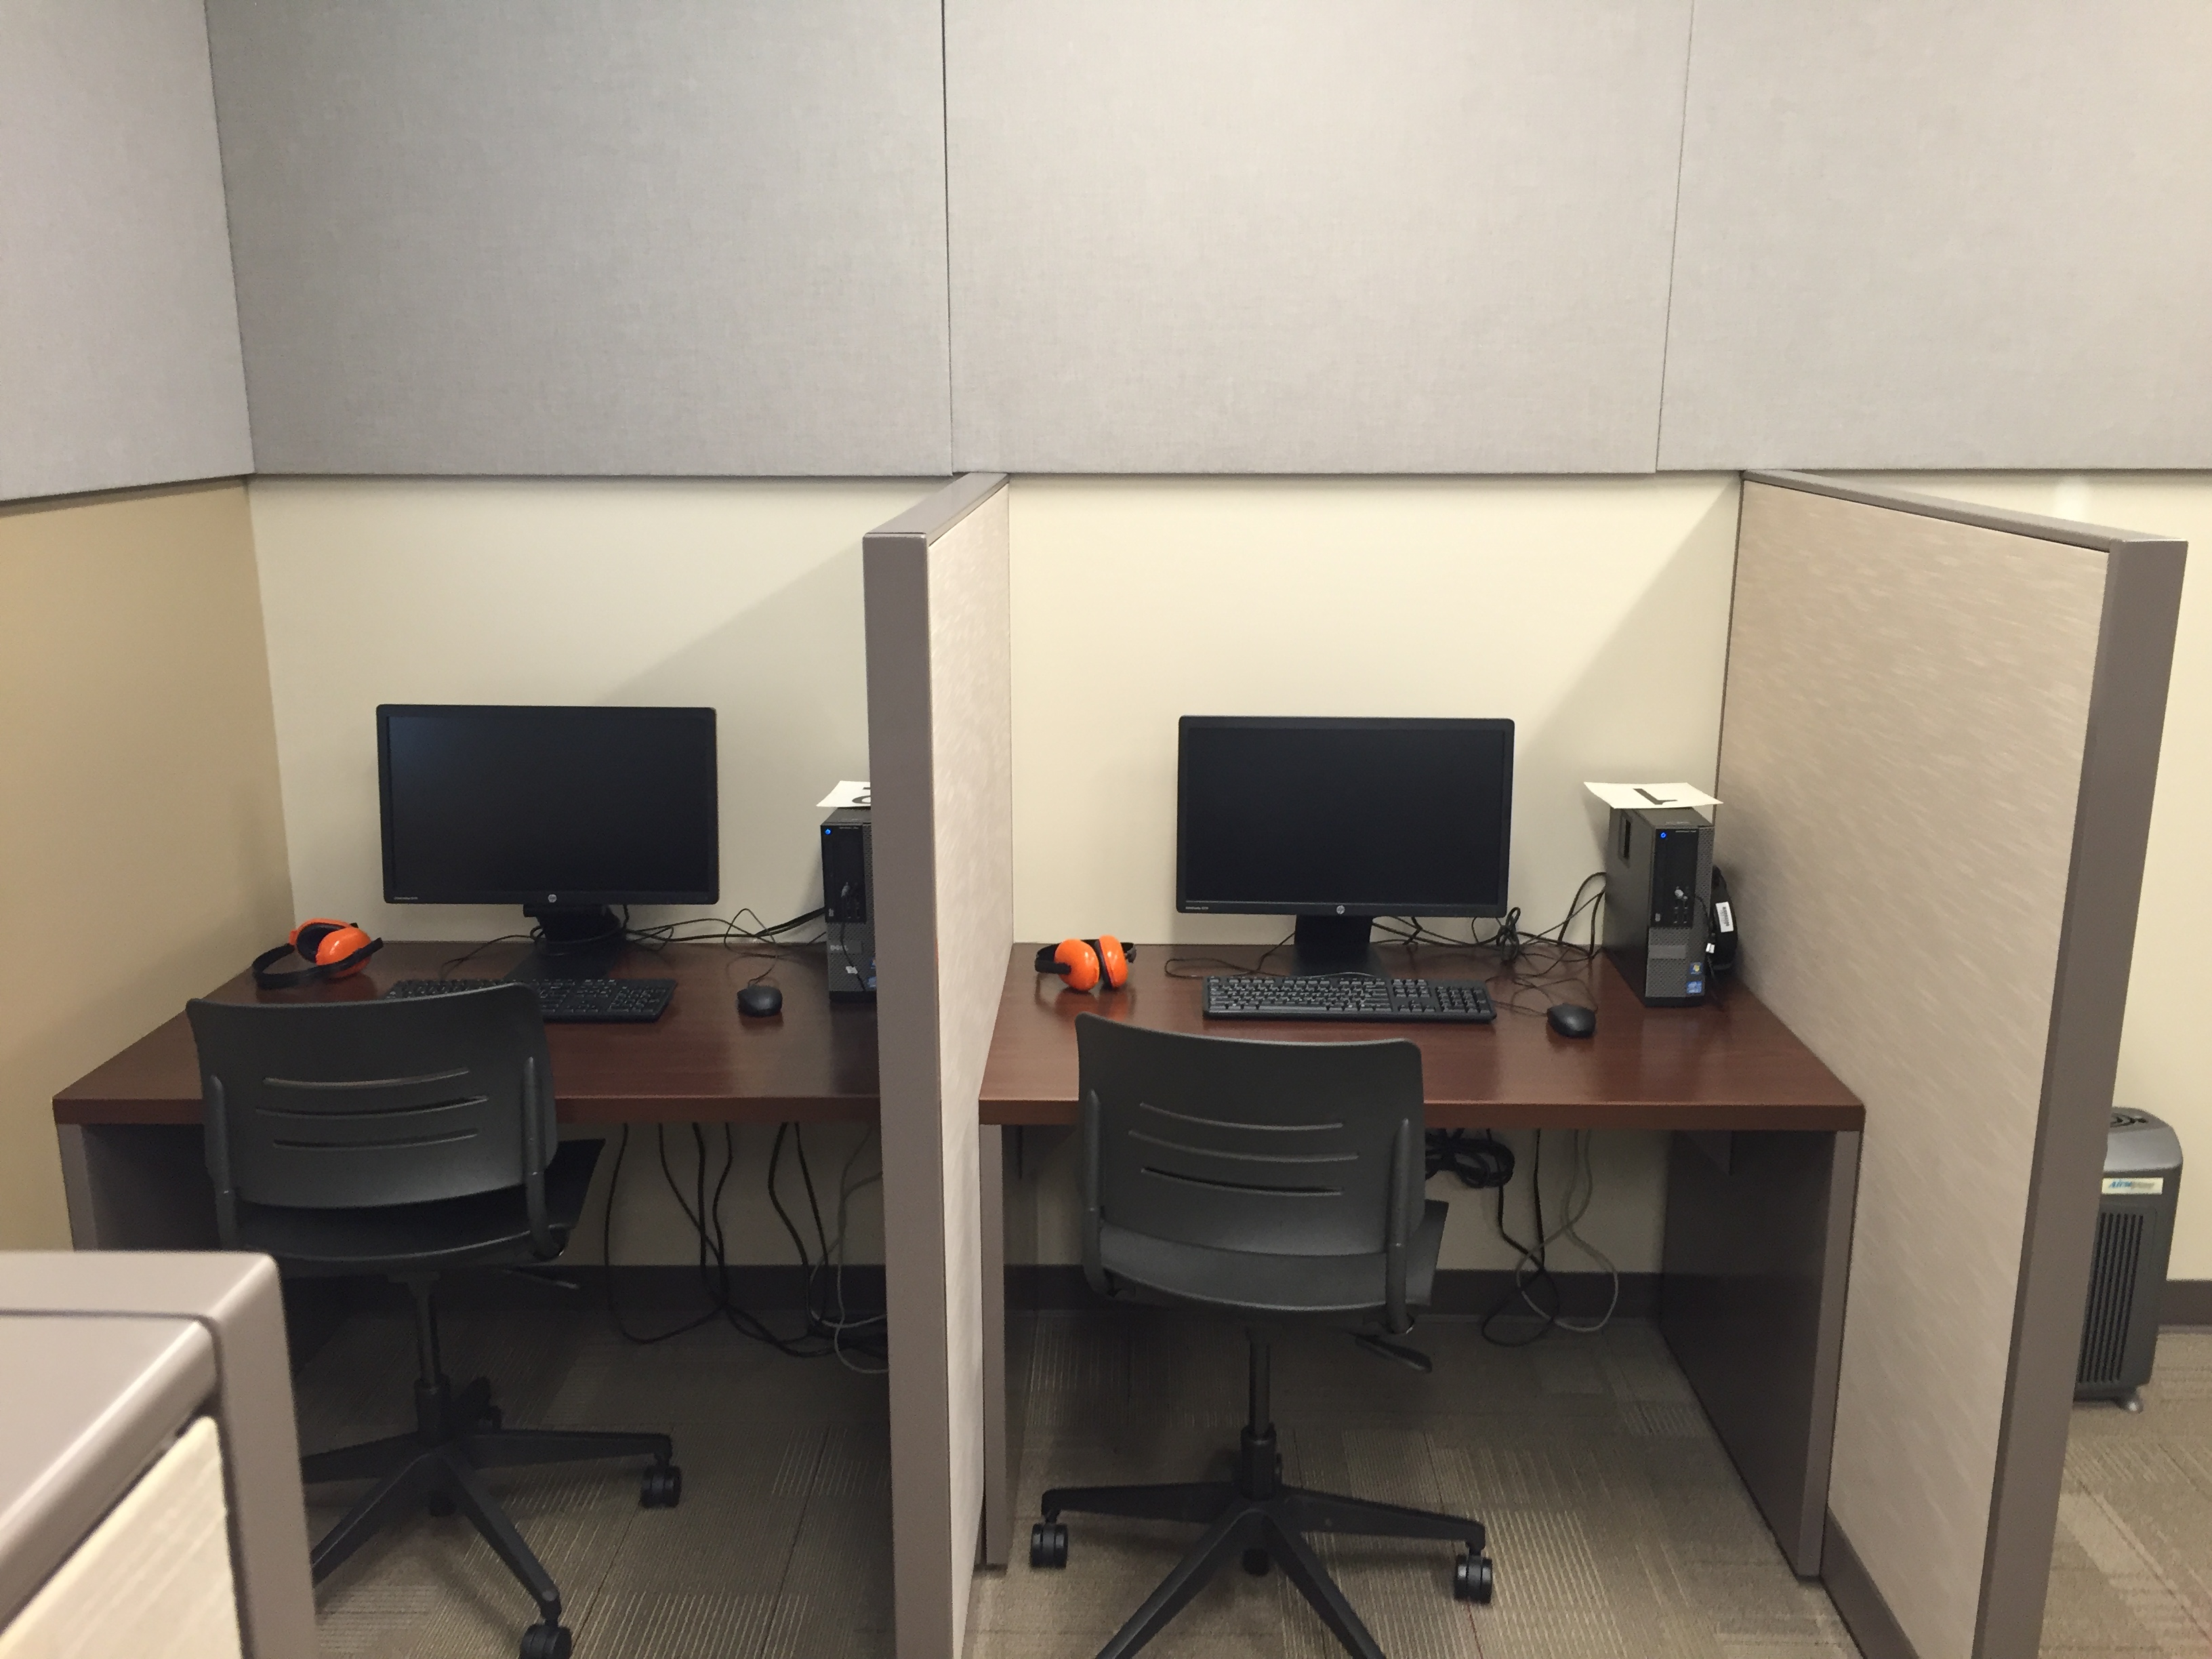 Two cubicles with computers, desks, and office chairs with orange headphones sitting to left of the computer.